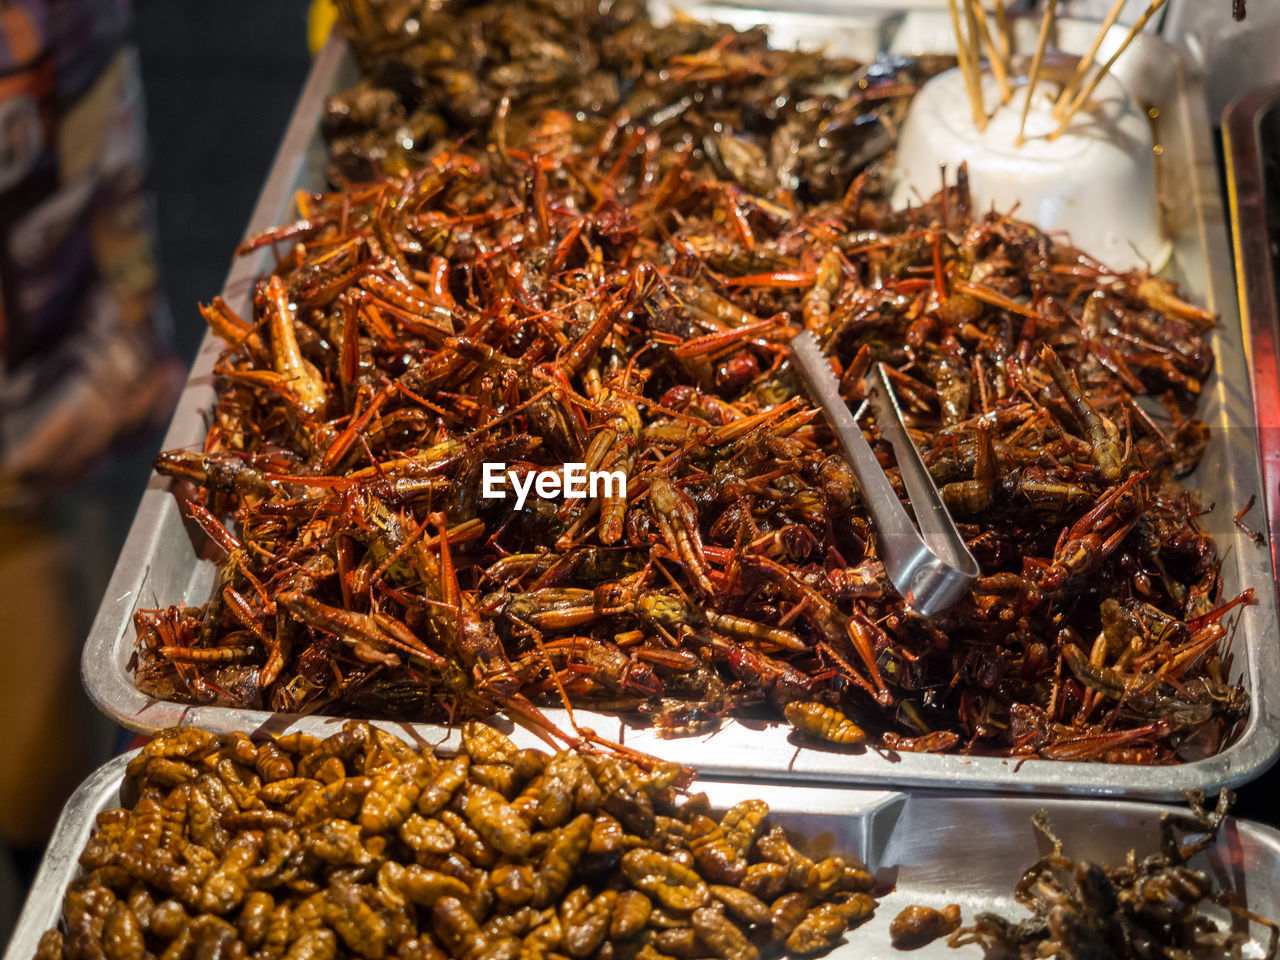 Close-up of fried crickets and maggots for sale in chinatown, bangkok, thailand